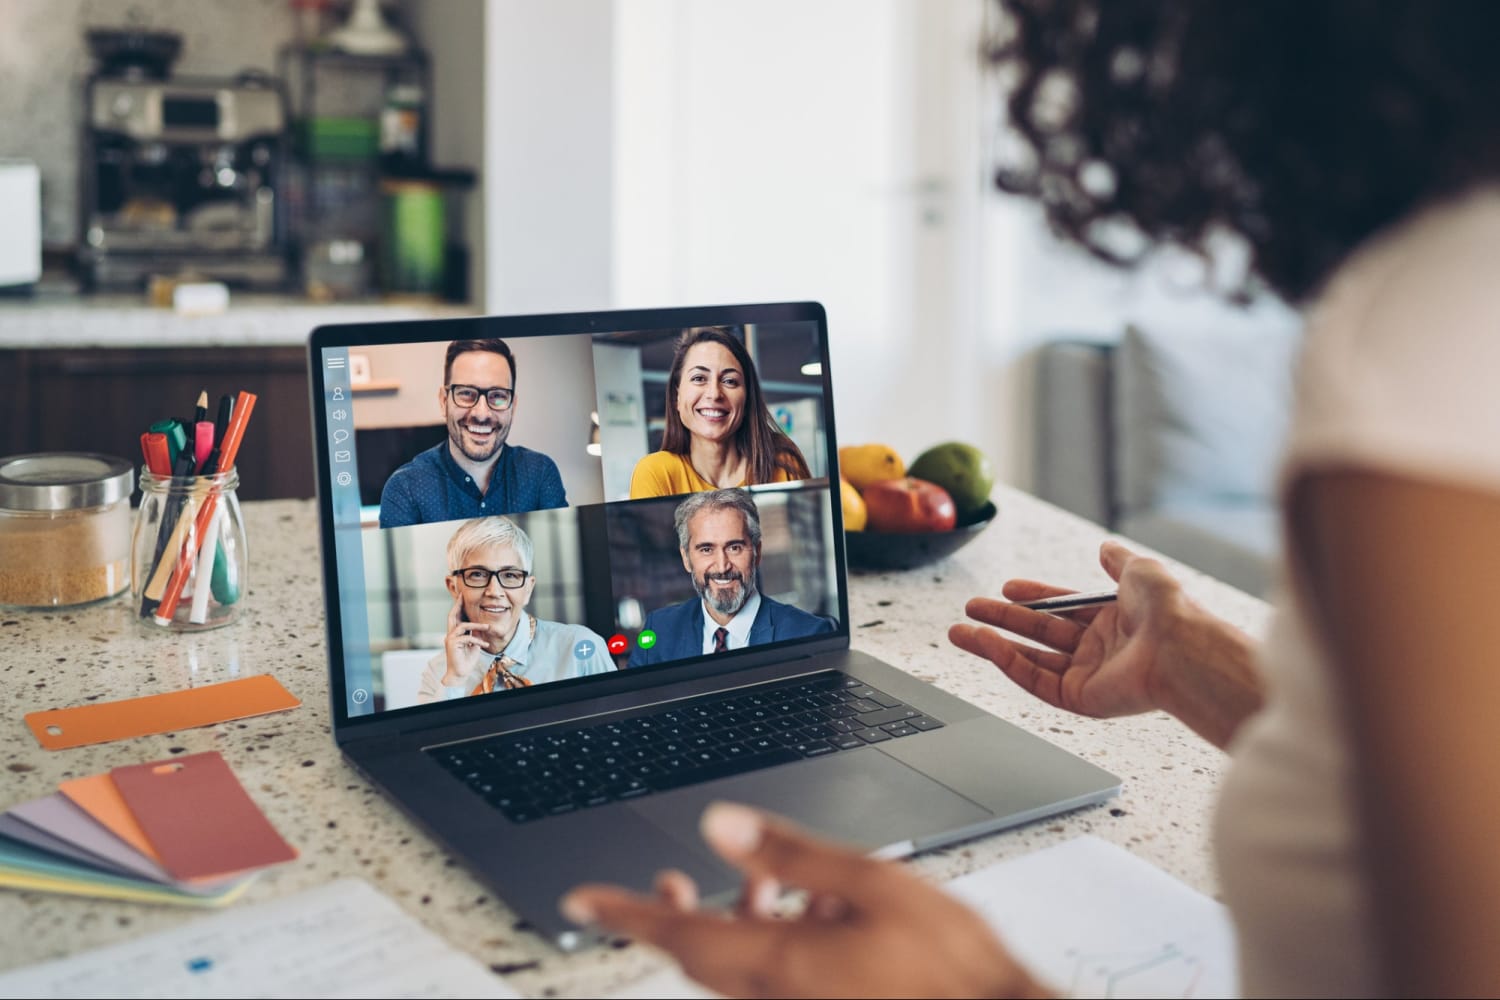 5 Tips for Hiring and Team Building Remotely